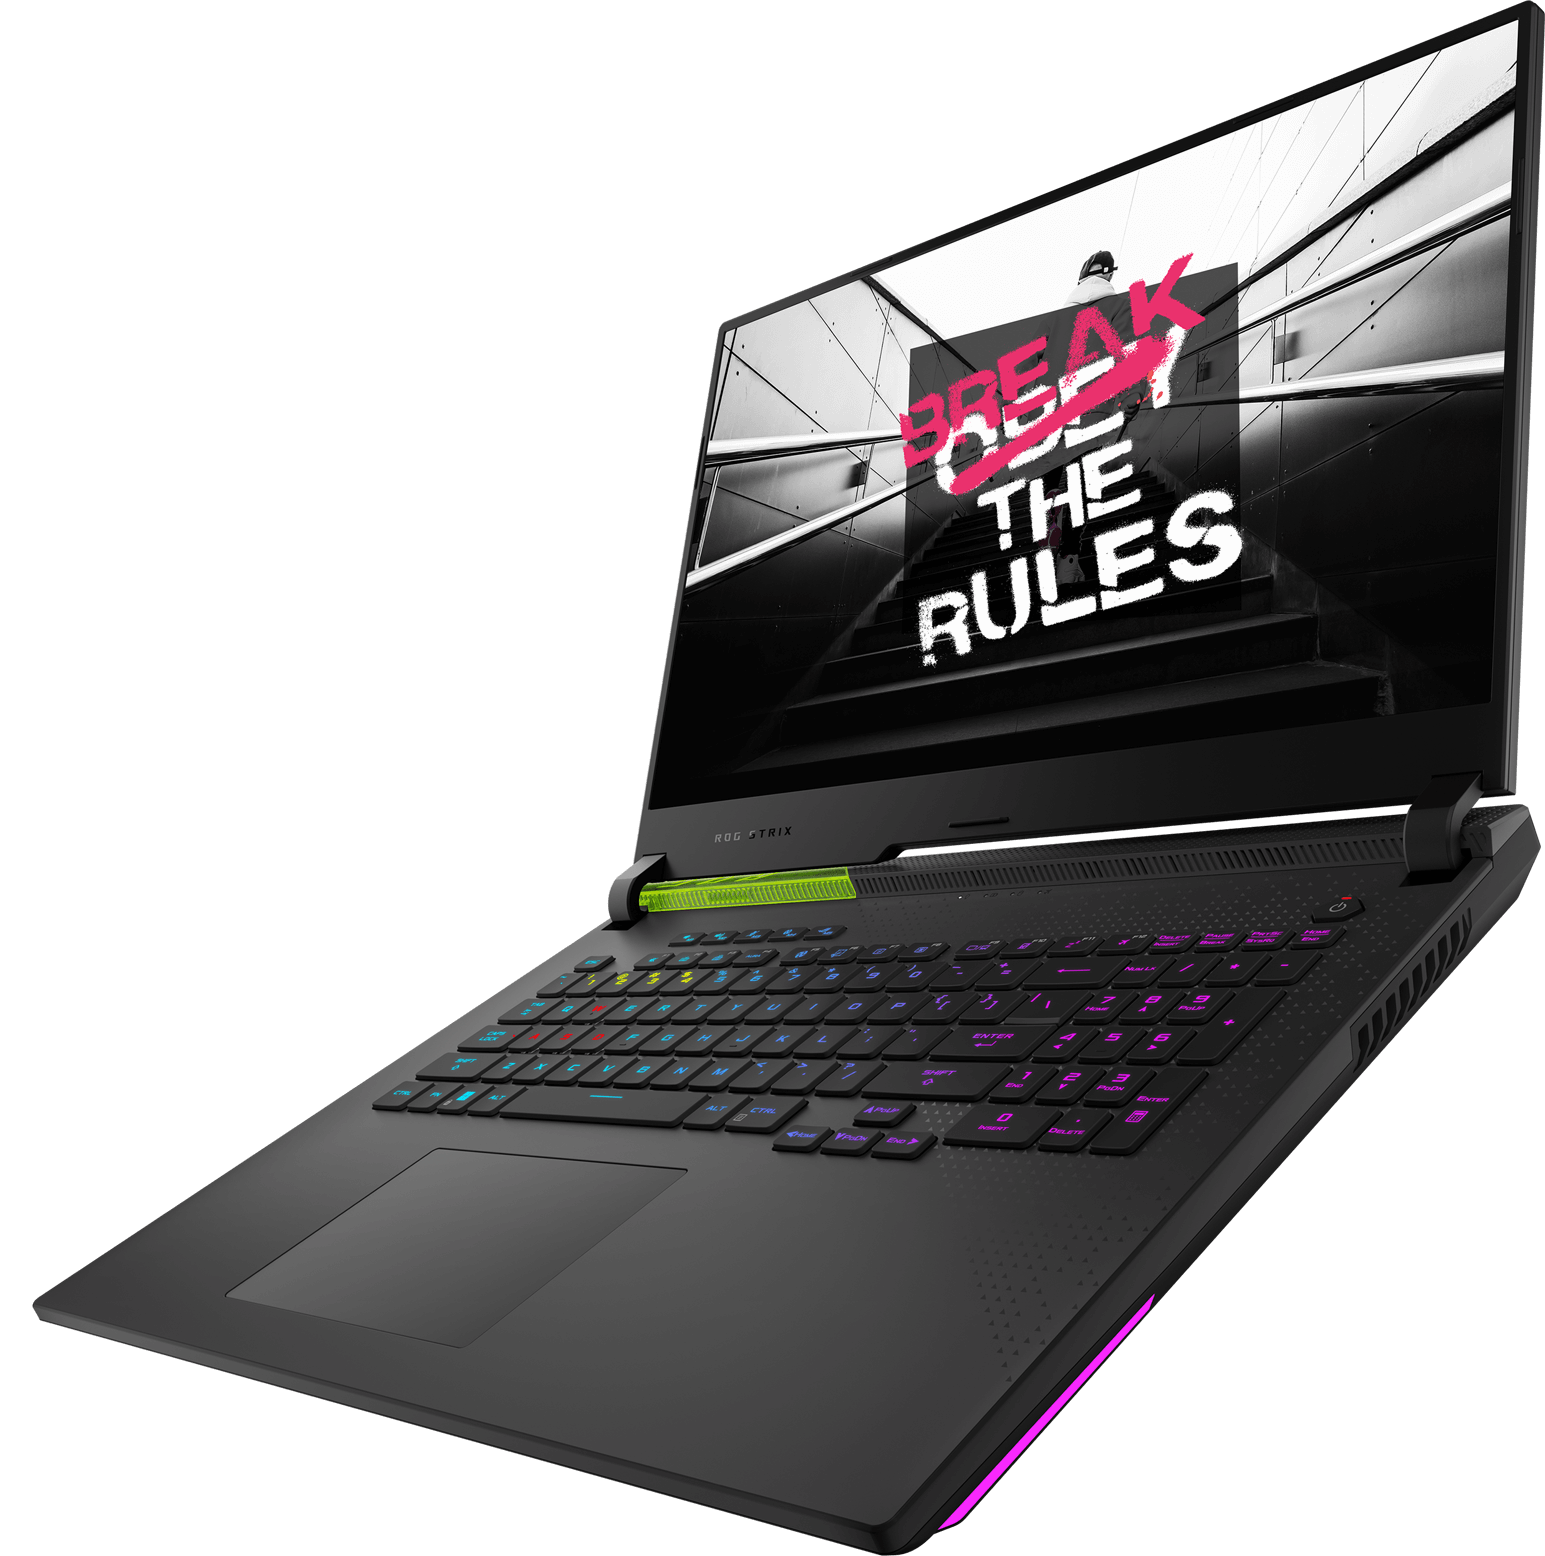 The image shows that the stair with the sentence of break the rules on ROG Strix G17 2022's display